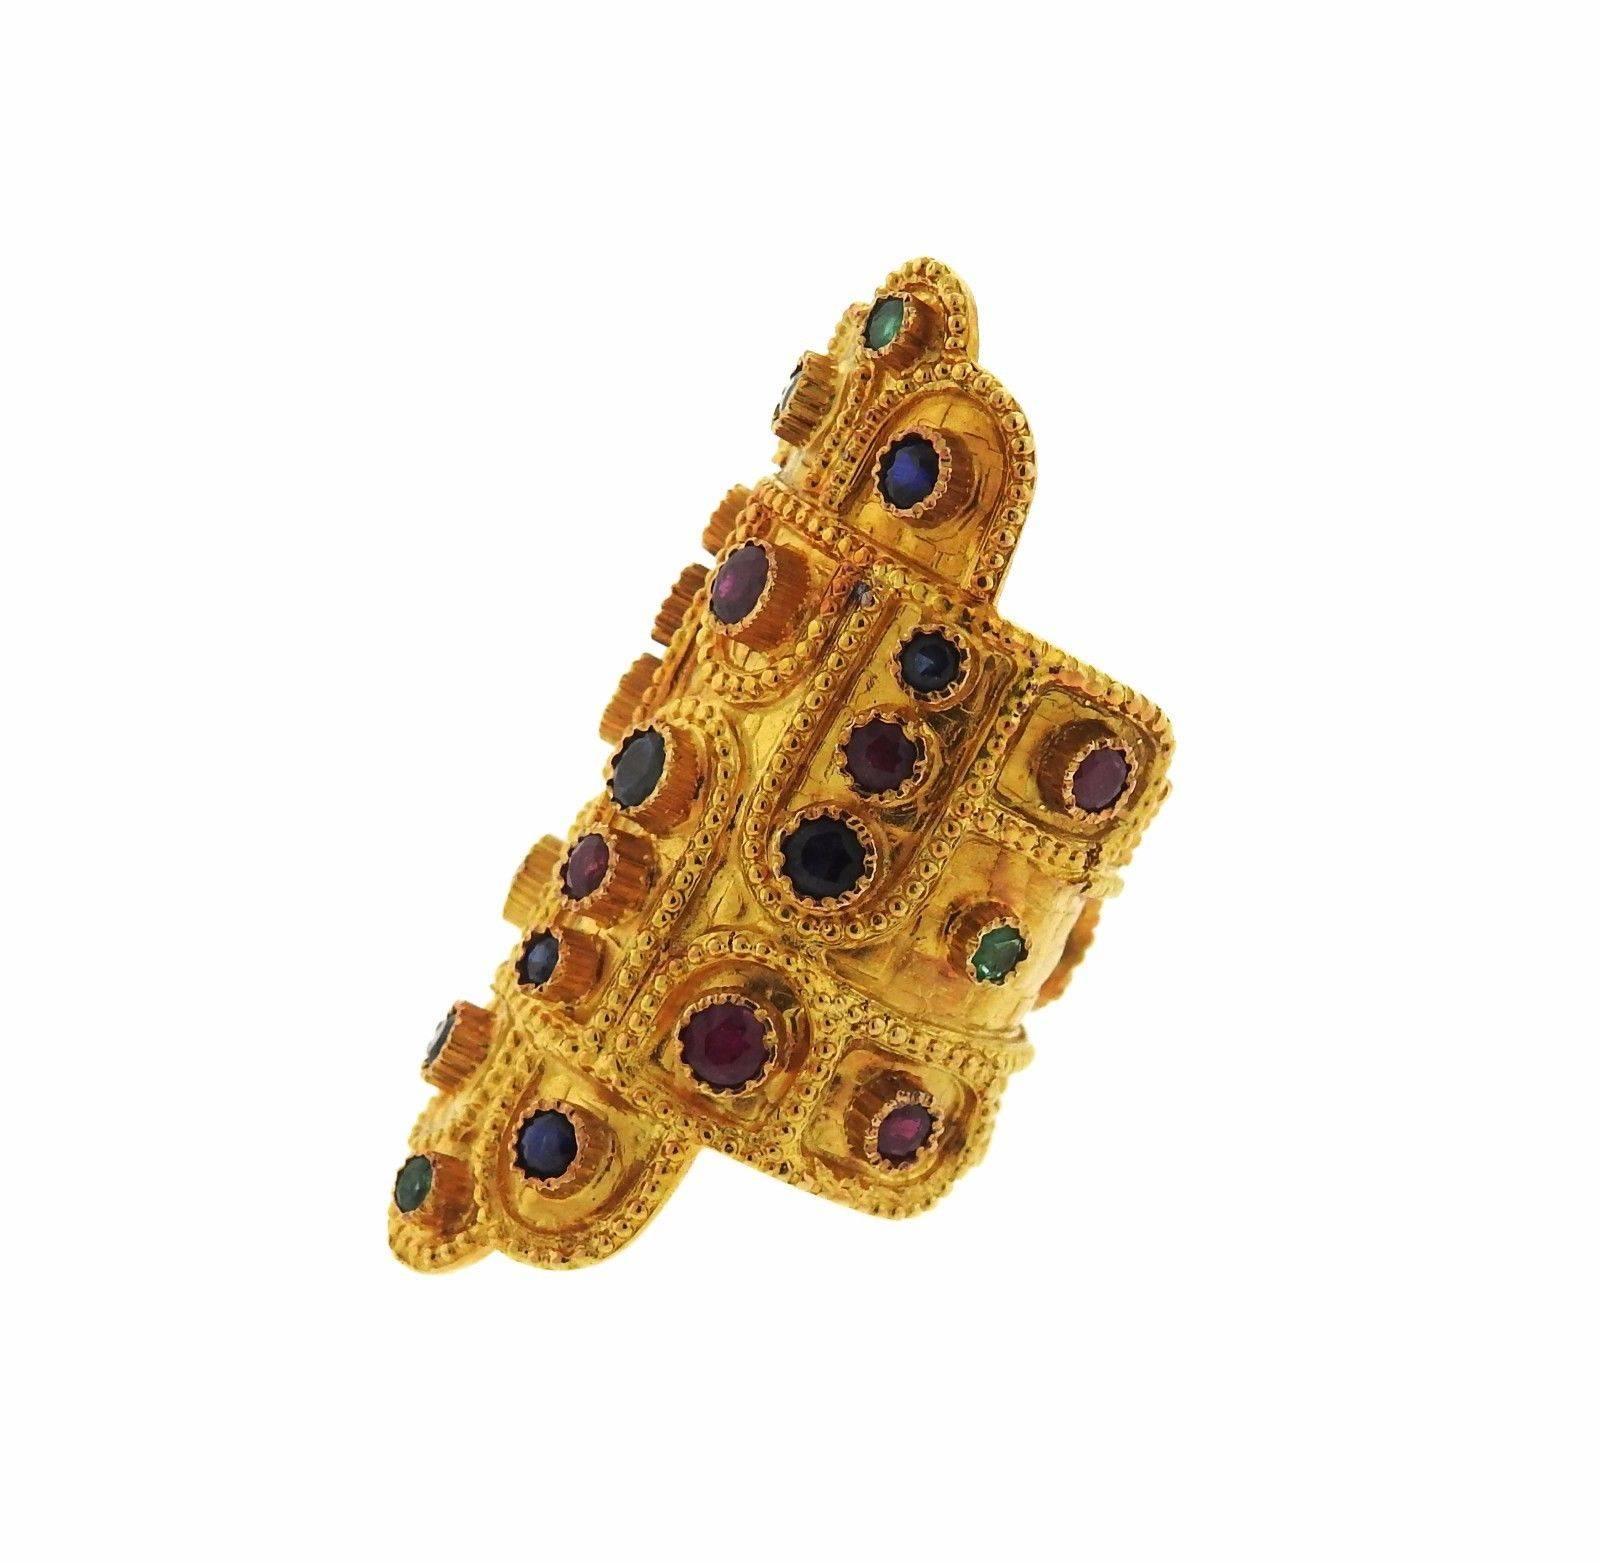 An 18k yellow gold ring set with sapphires rubies and emeralds.  The ring is a size 7.75 (shank is open, slightly flexible). Top measures 45mm at widest point.  The weight of the piece is 18.8 grams.  Marked: A21, Greece, 750, Maker's Mark.